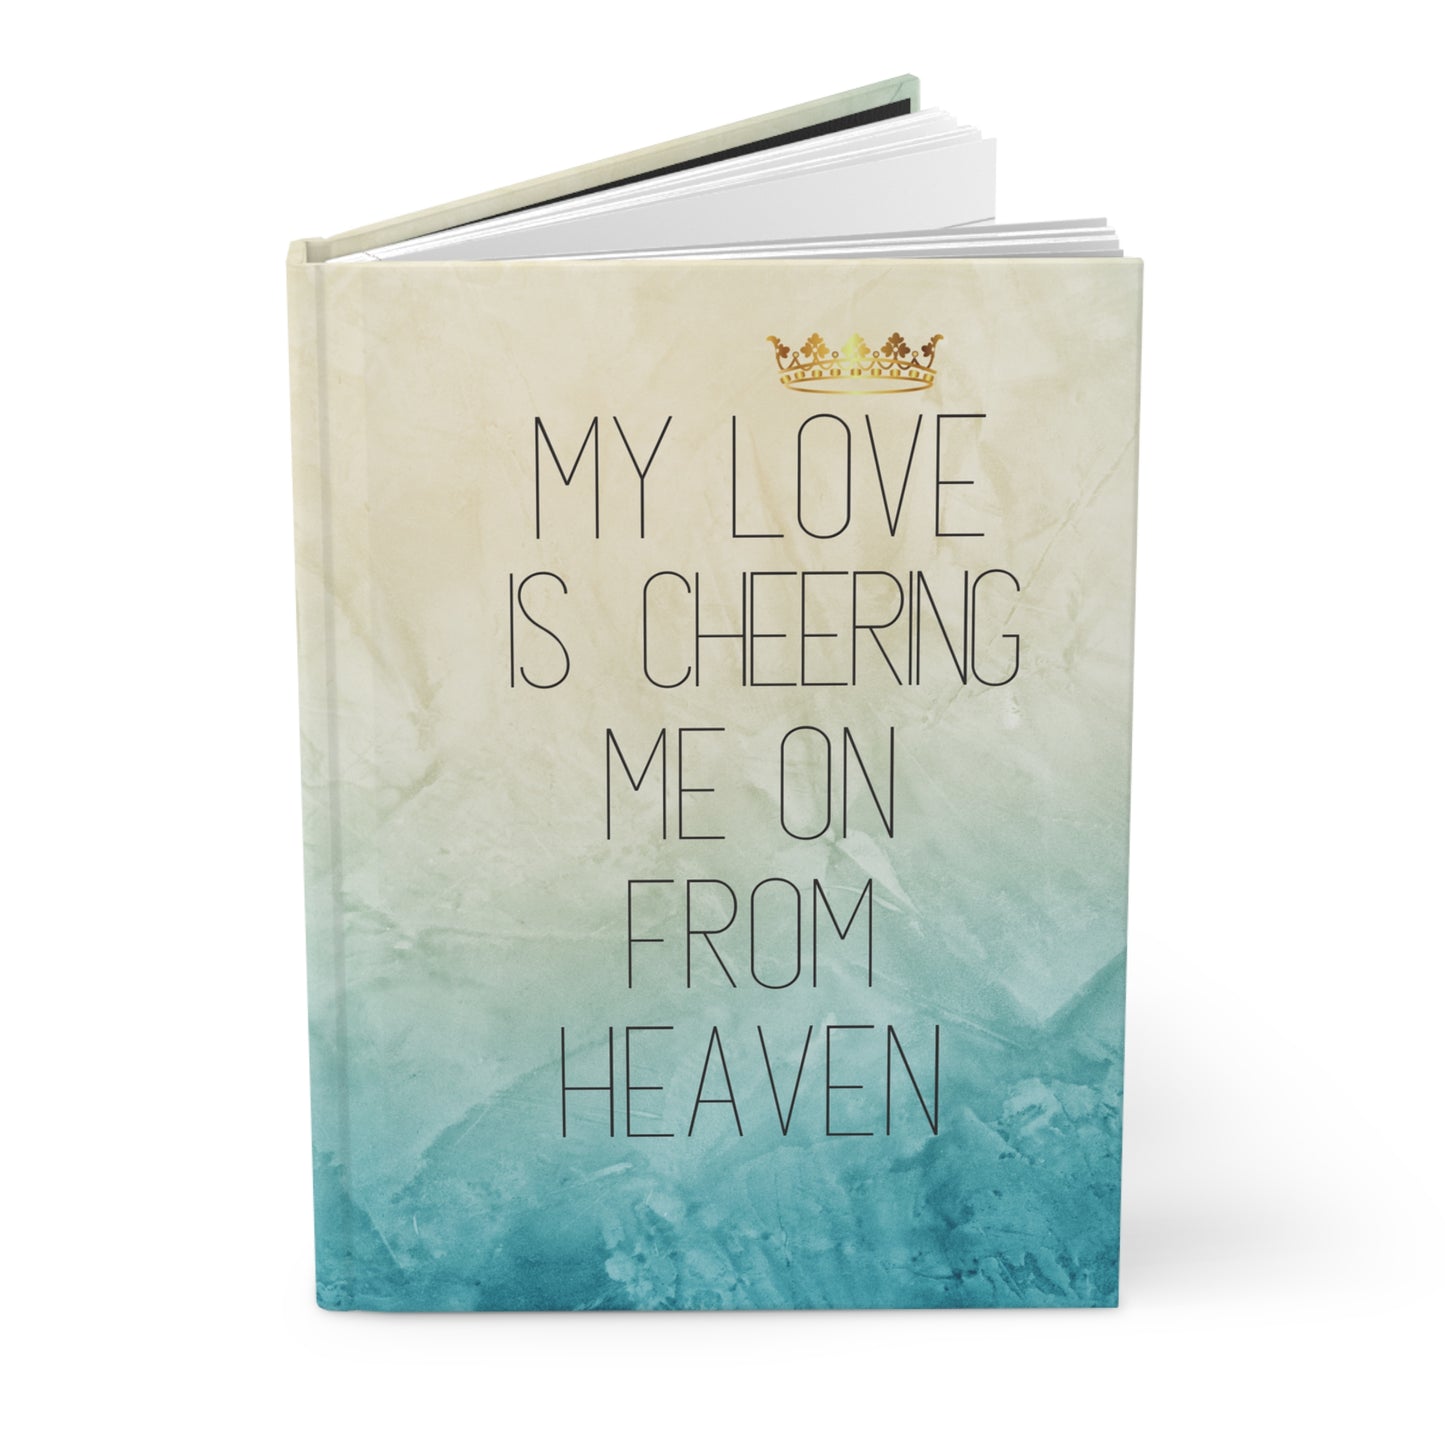 Grief Journal for Loss of Loved One, Cheering Me On From Heaven